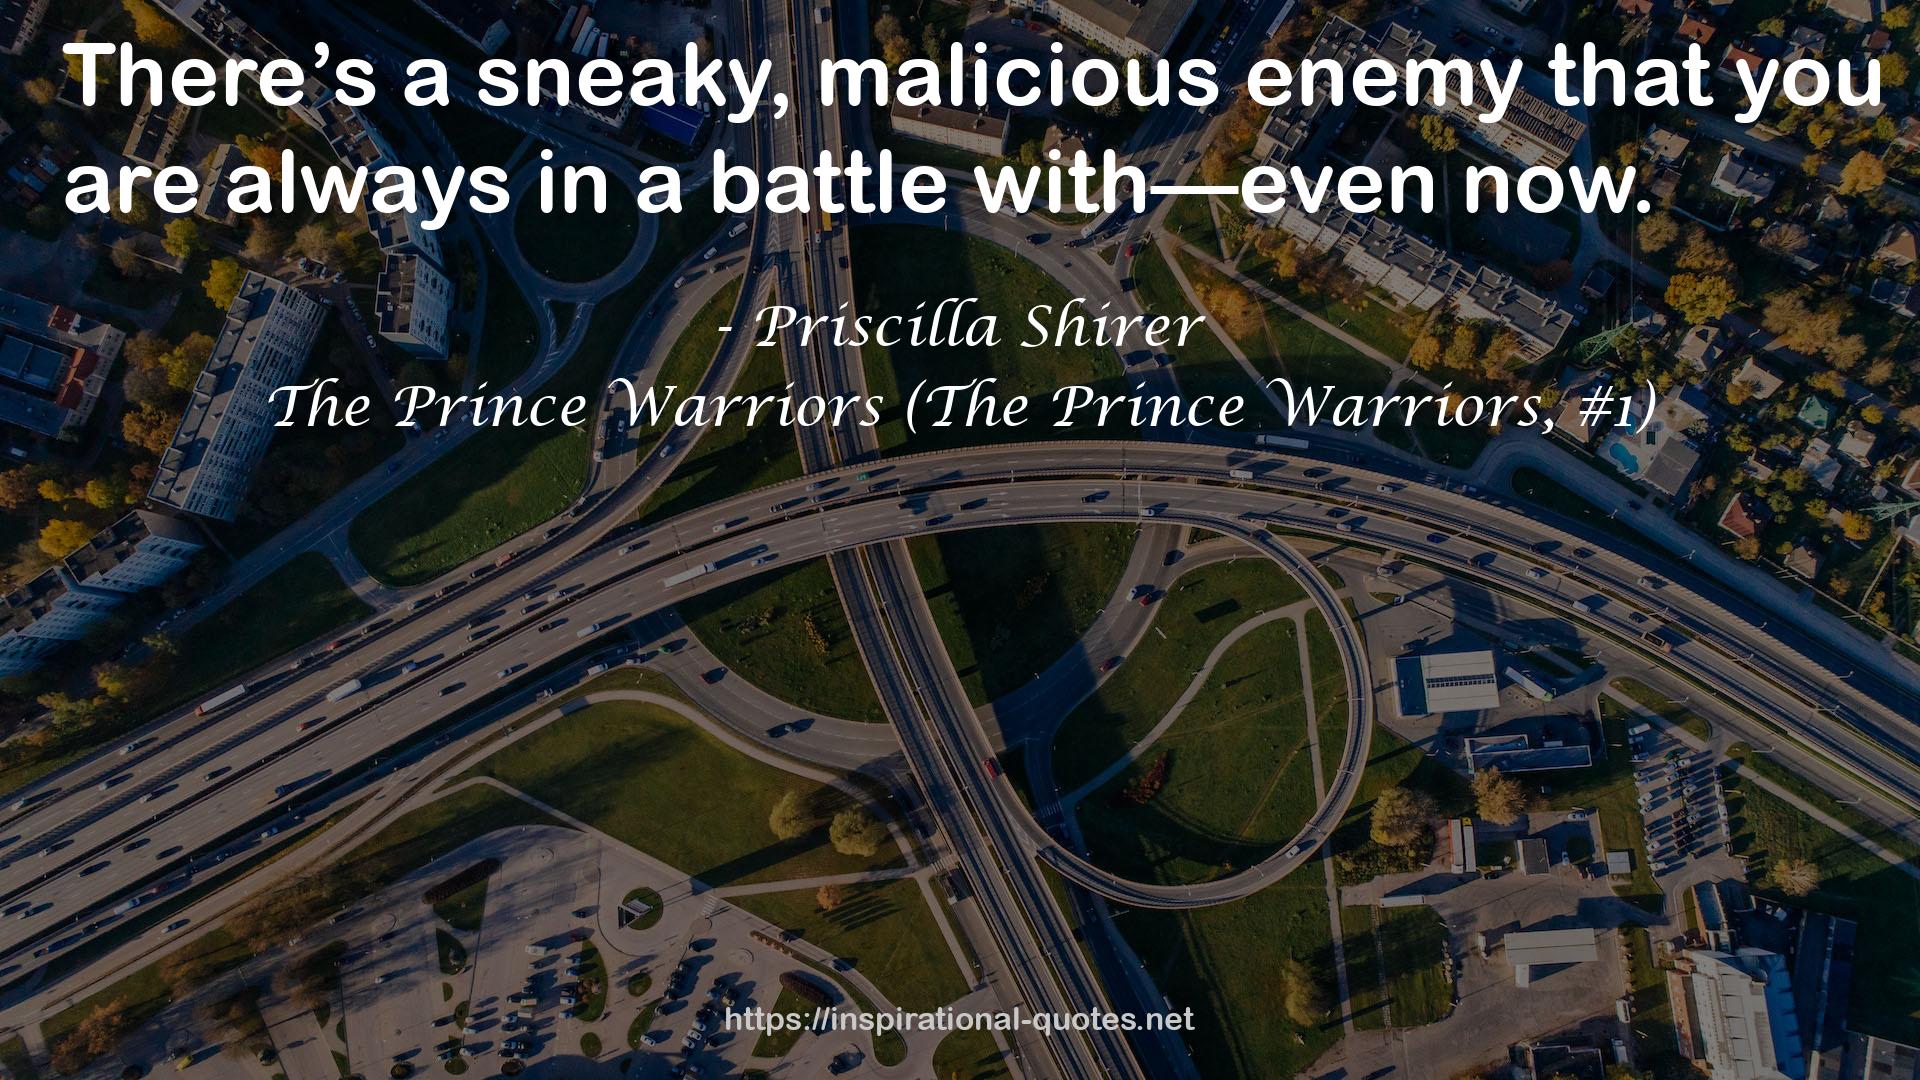 The Prince Warriors (The Prince Warriors, #1) QUOTES